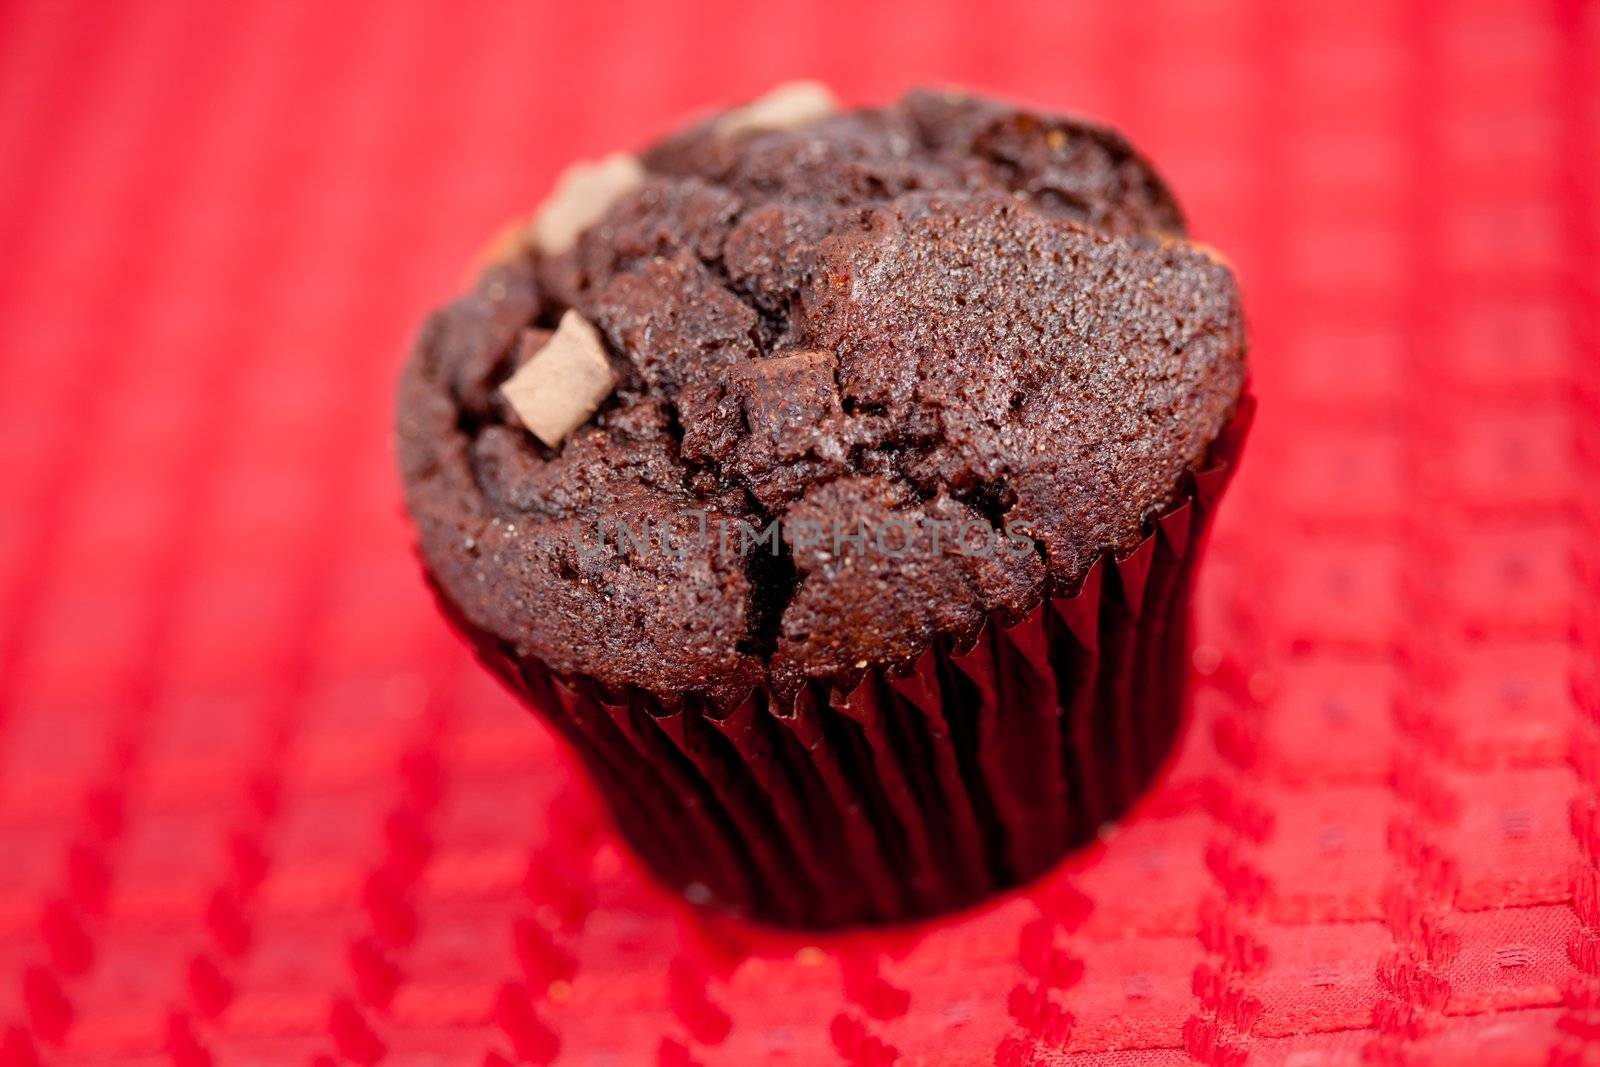 Chocolate muffin on a tablecloth by Wavebreakmedia